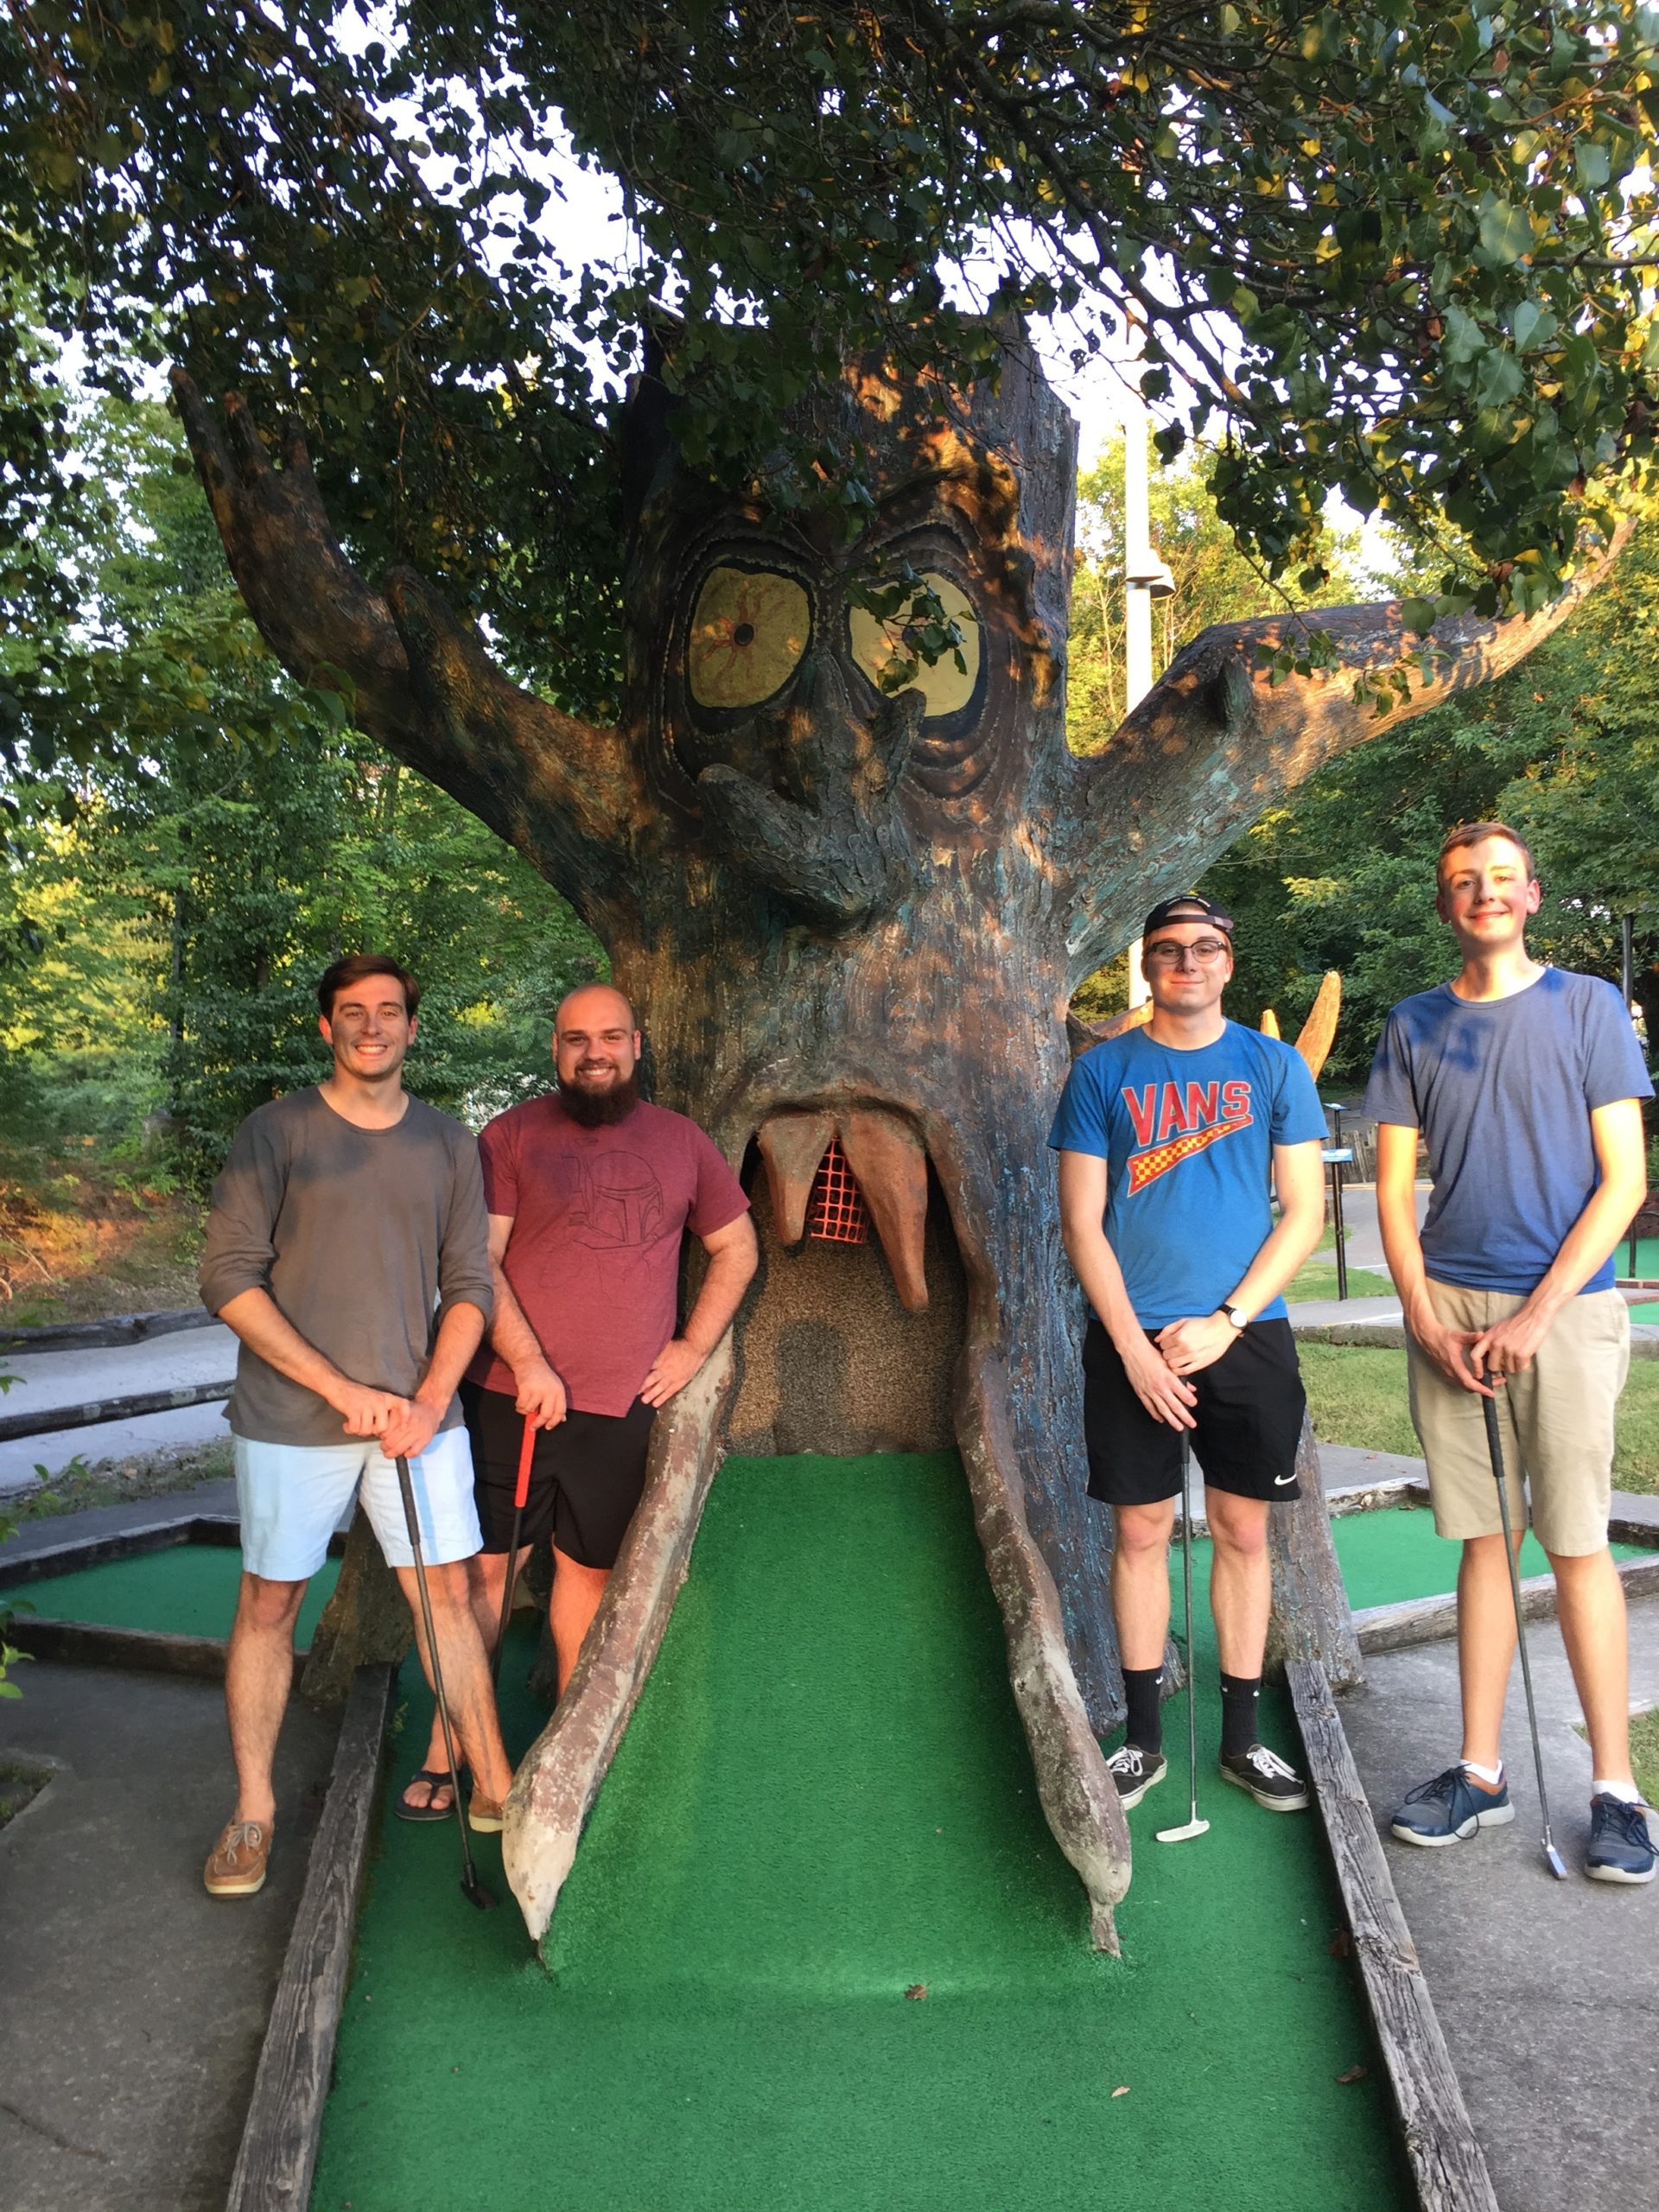 Enjoying a nice round of mini-golf in Tennessee